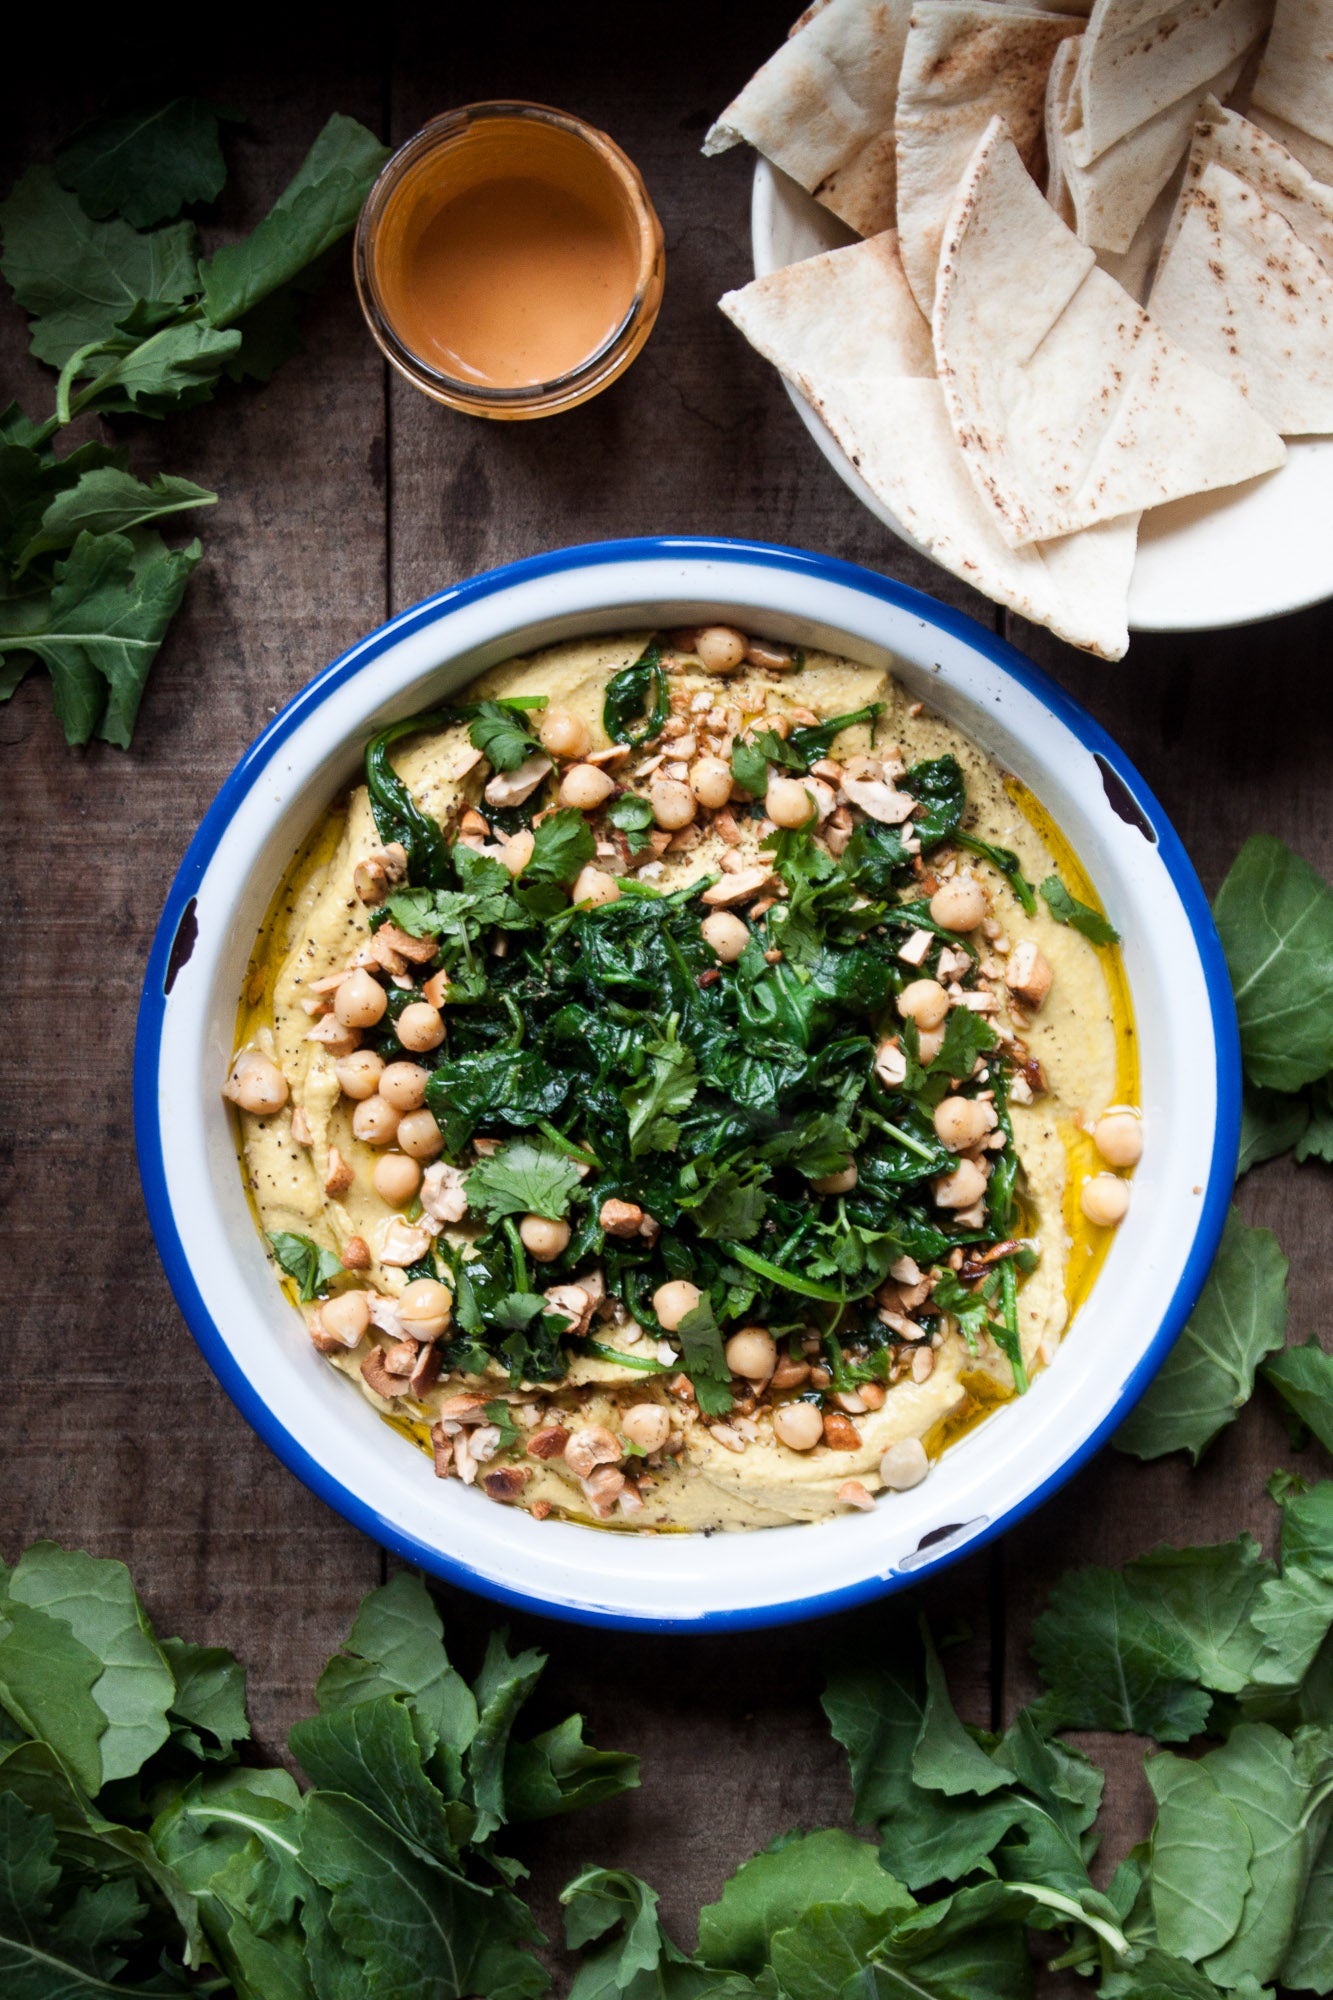 Chipotle Hummus Platter with Cashews + Greens 